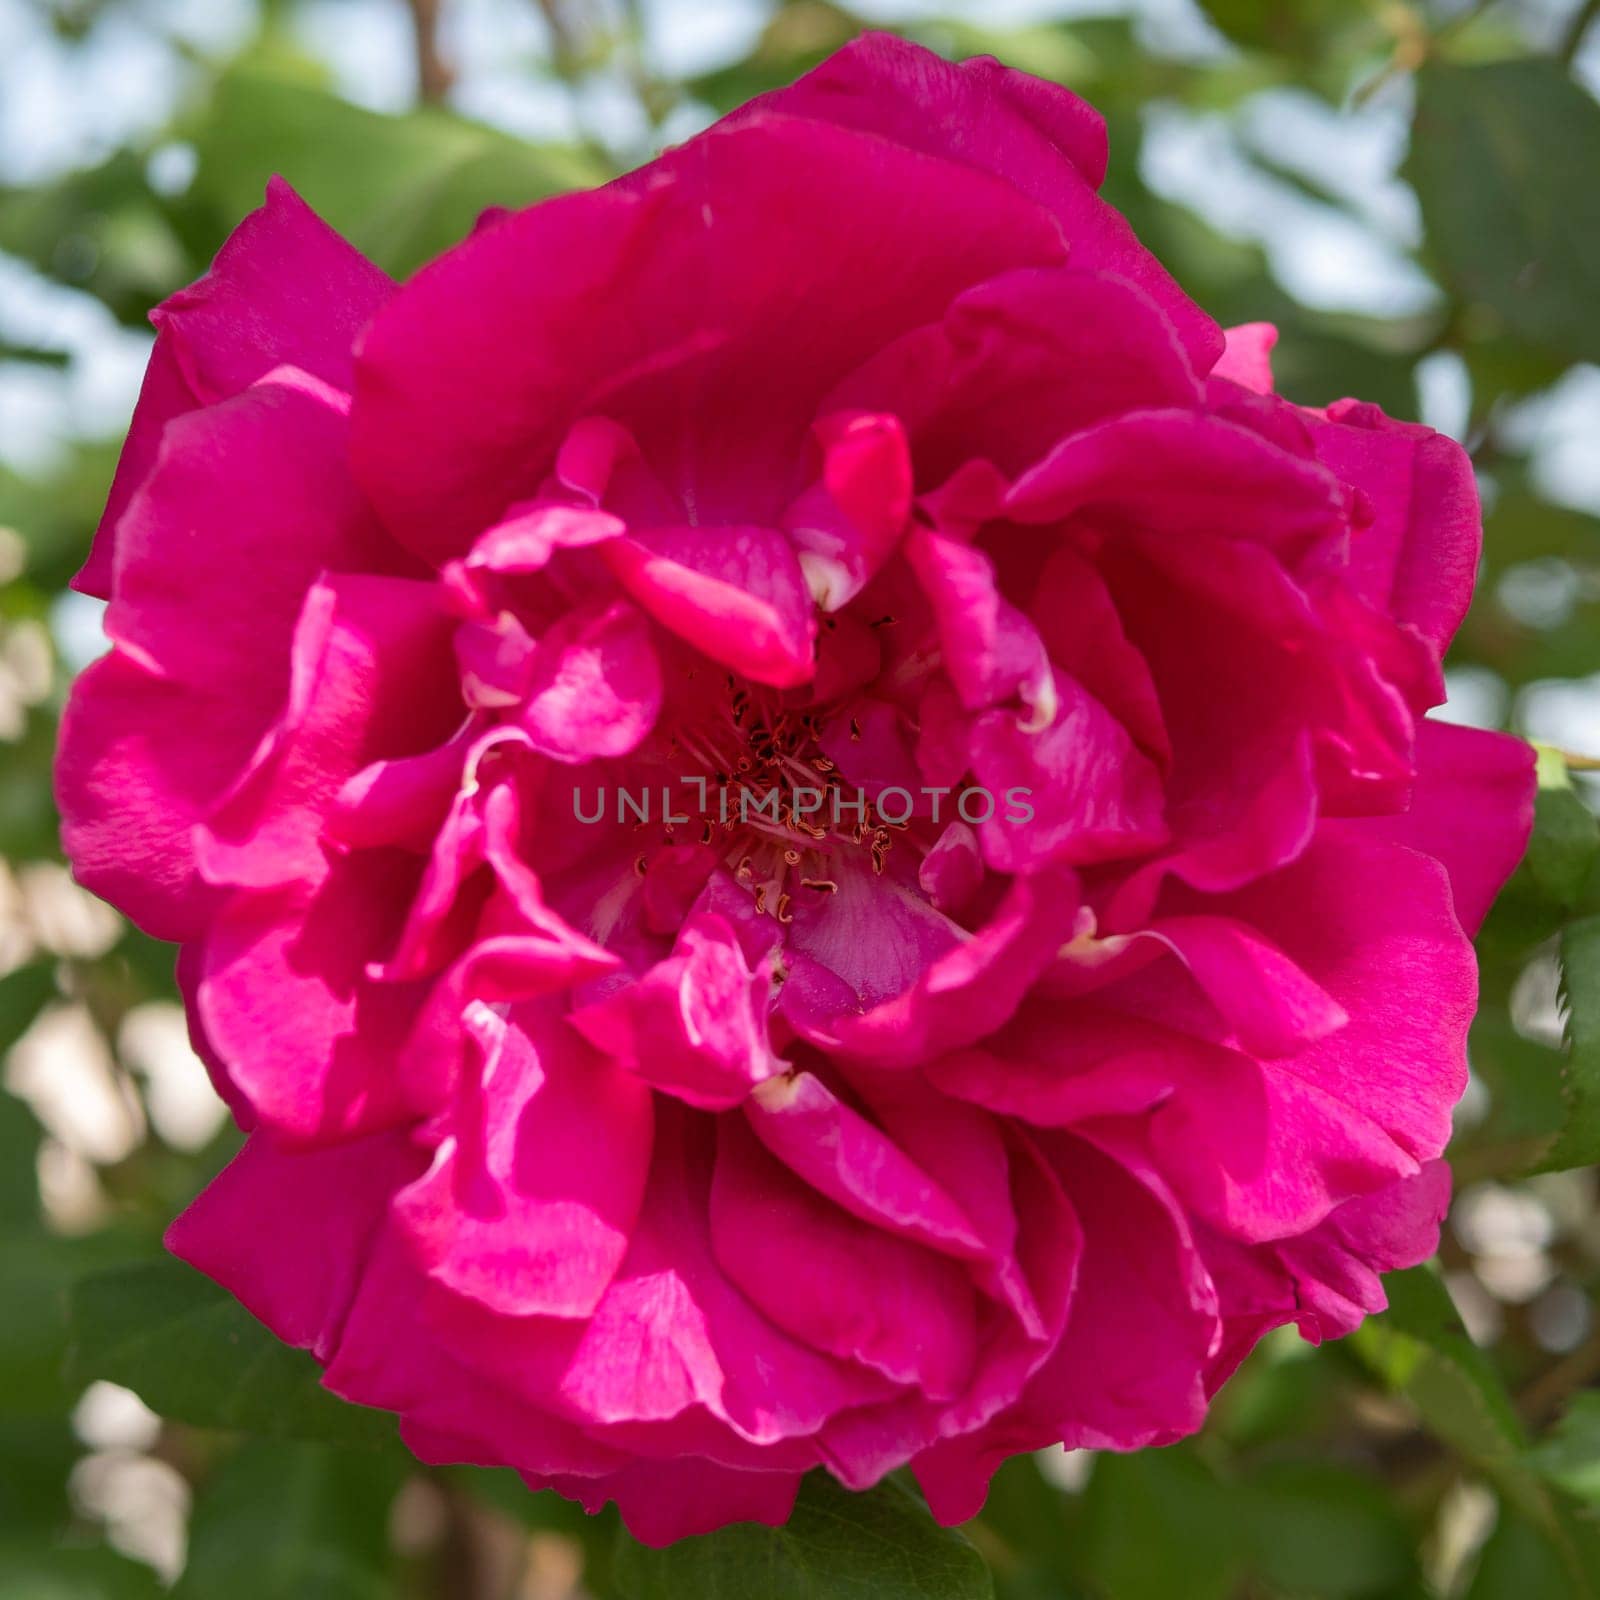 A close up of a pink rose with vibrant green leaves in the background